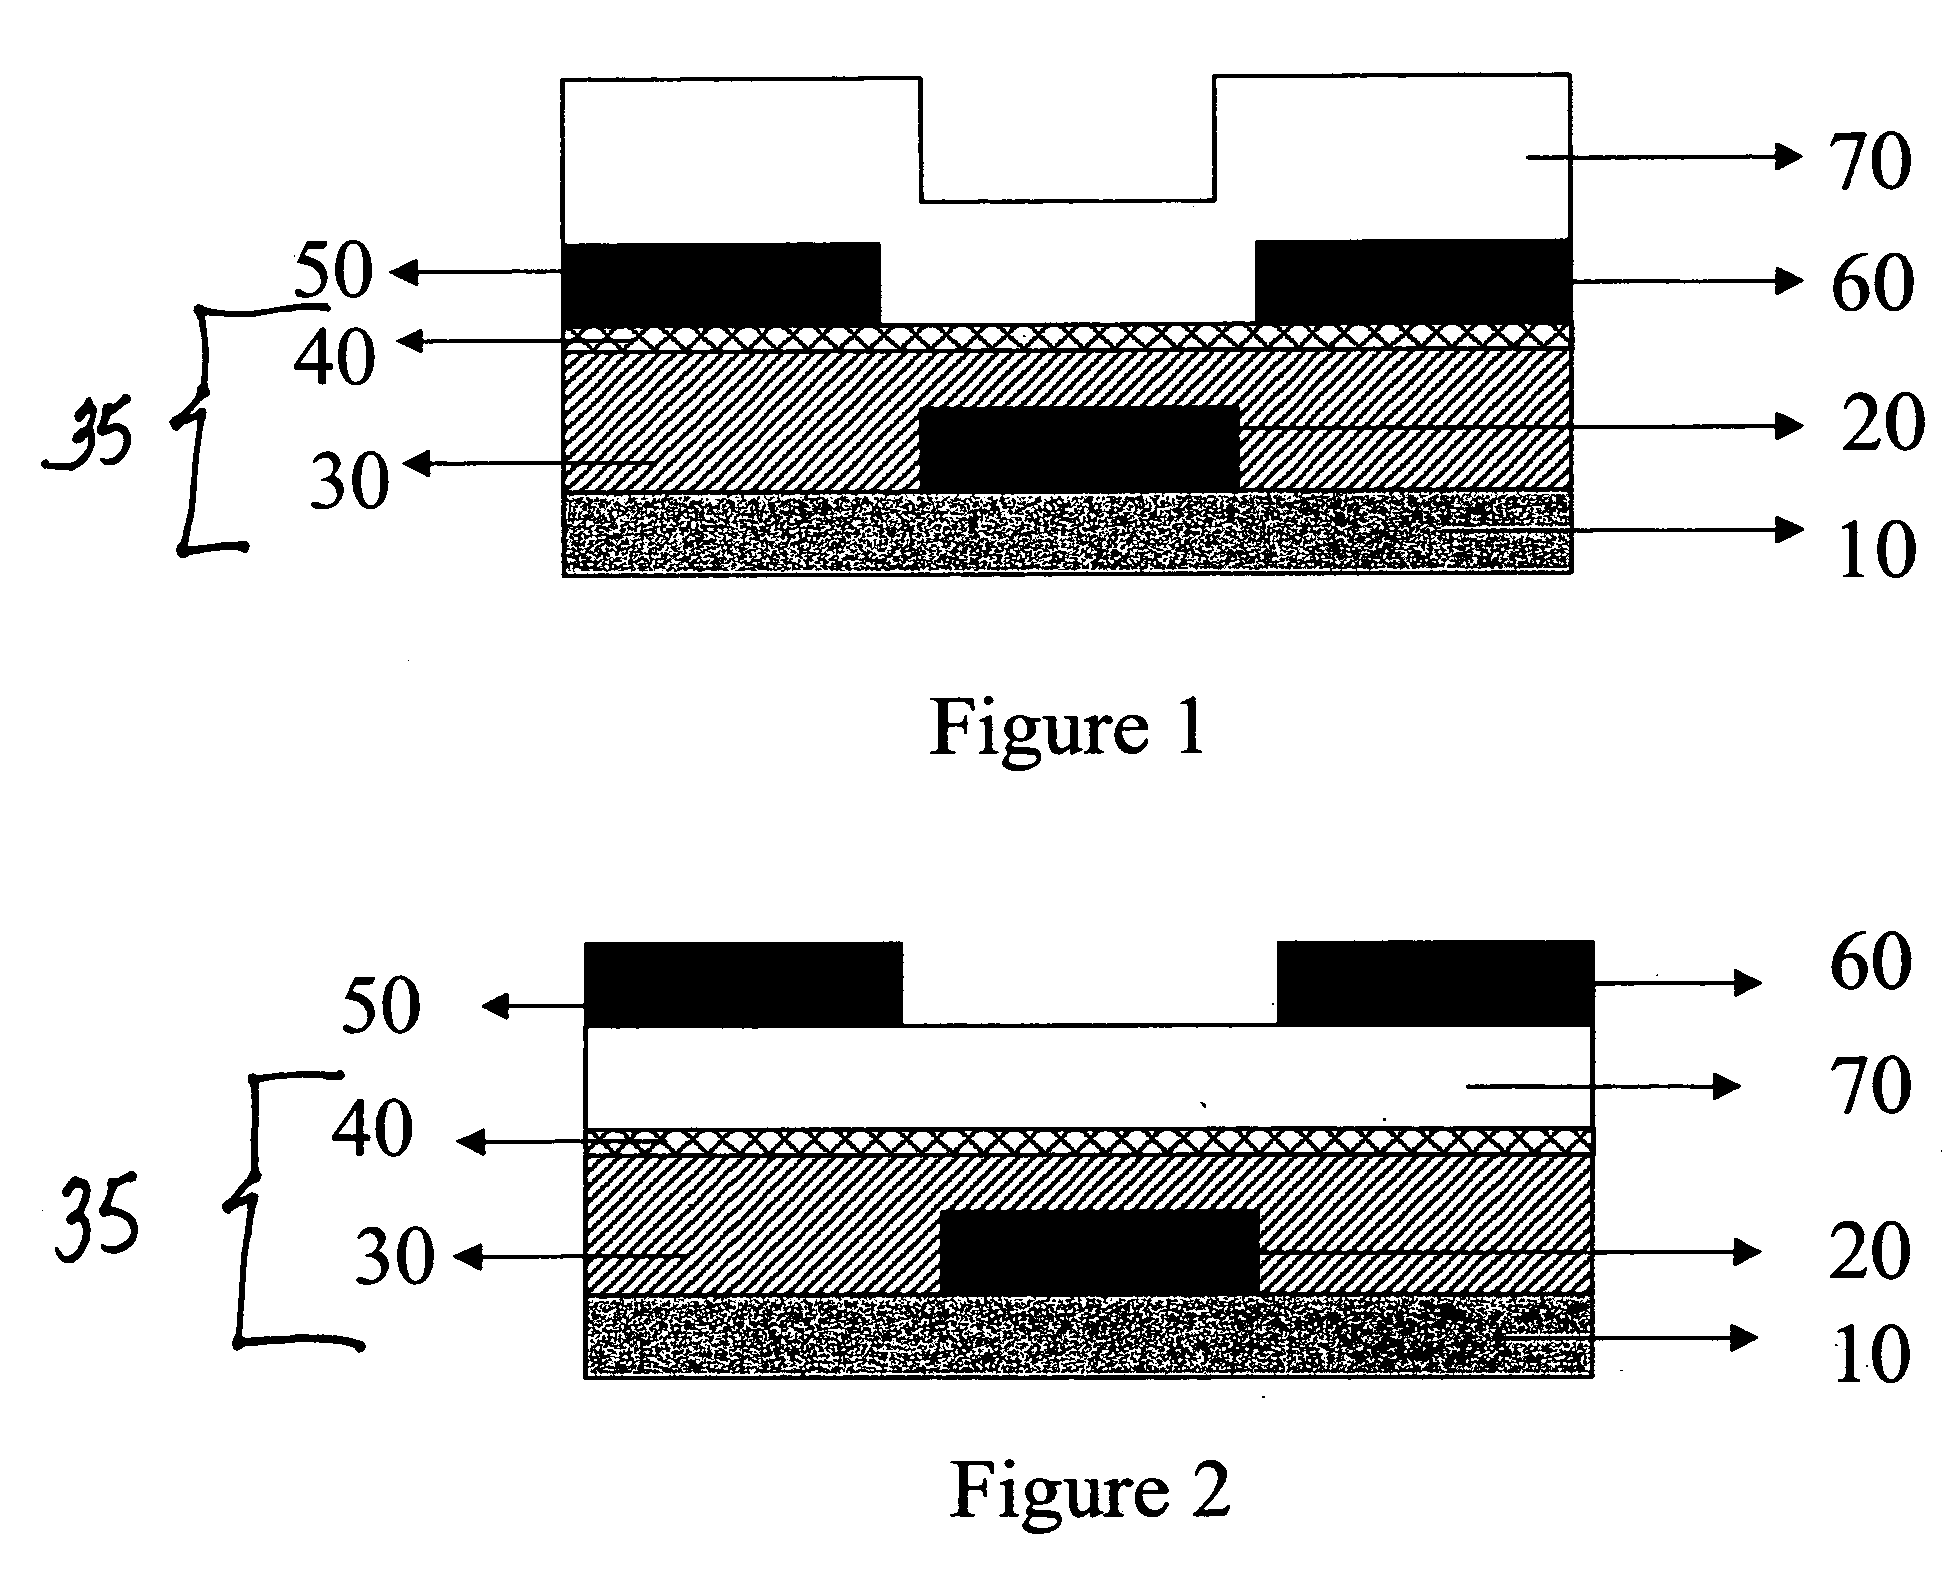 Polymeric gate dielectrics for organic thin film transistors and methods of making the same